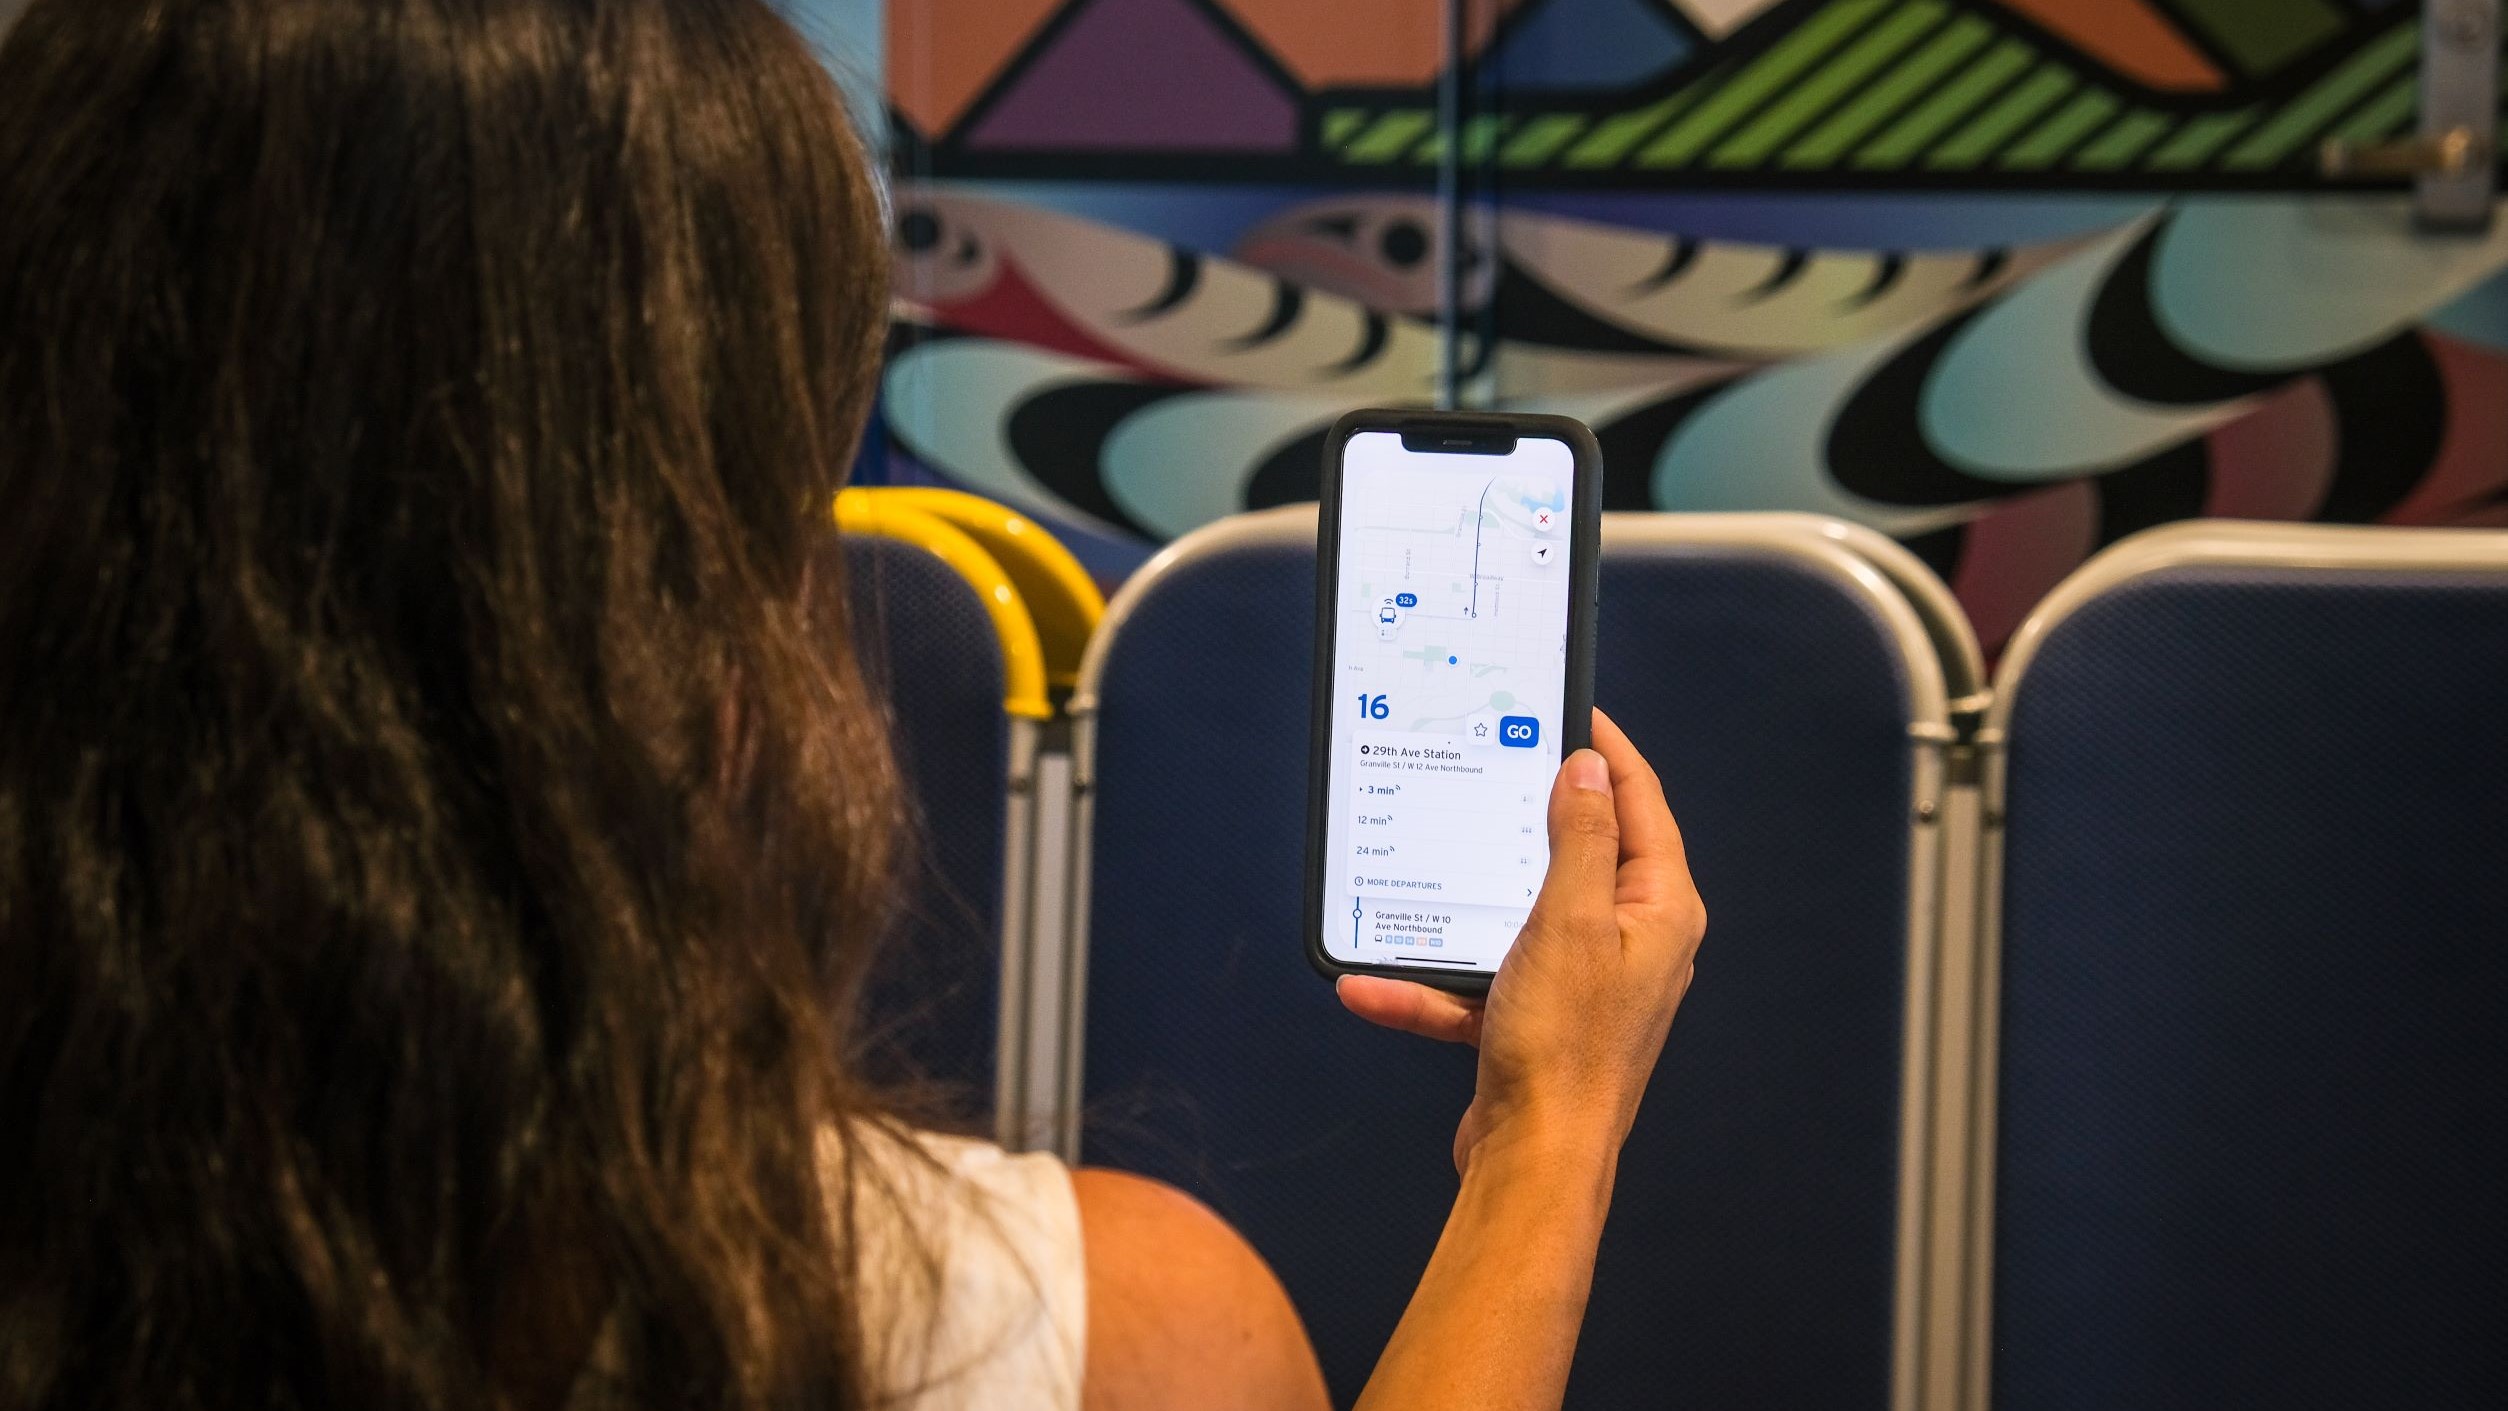 Customer using the Transit app onboard the Burrard Chinook SeaBus